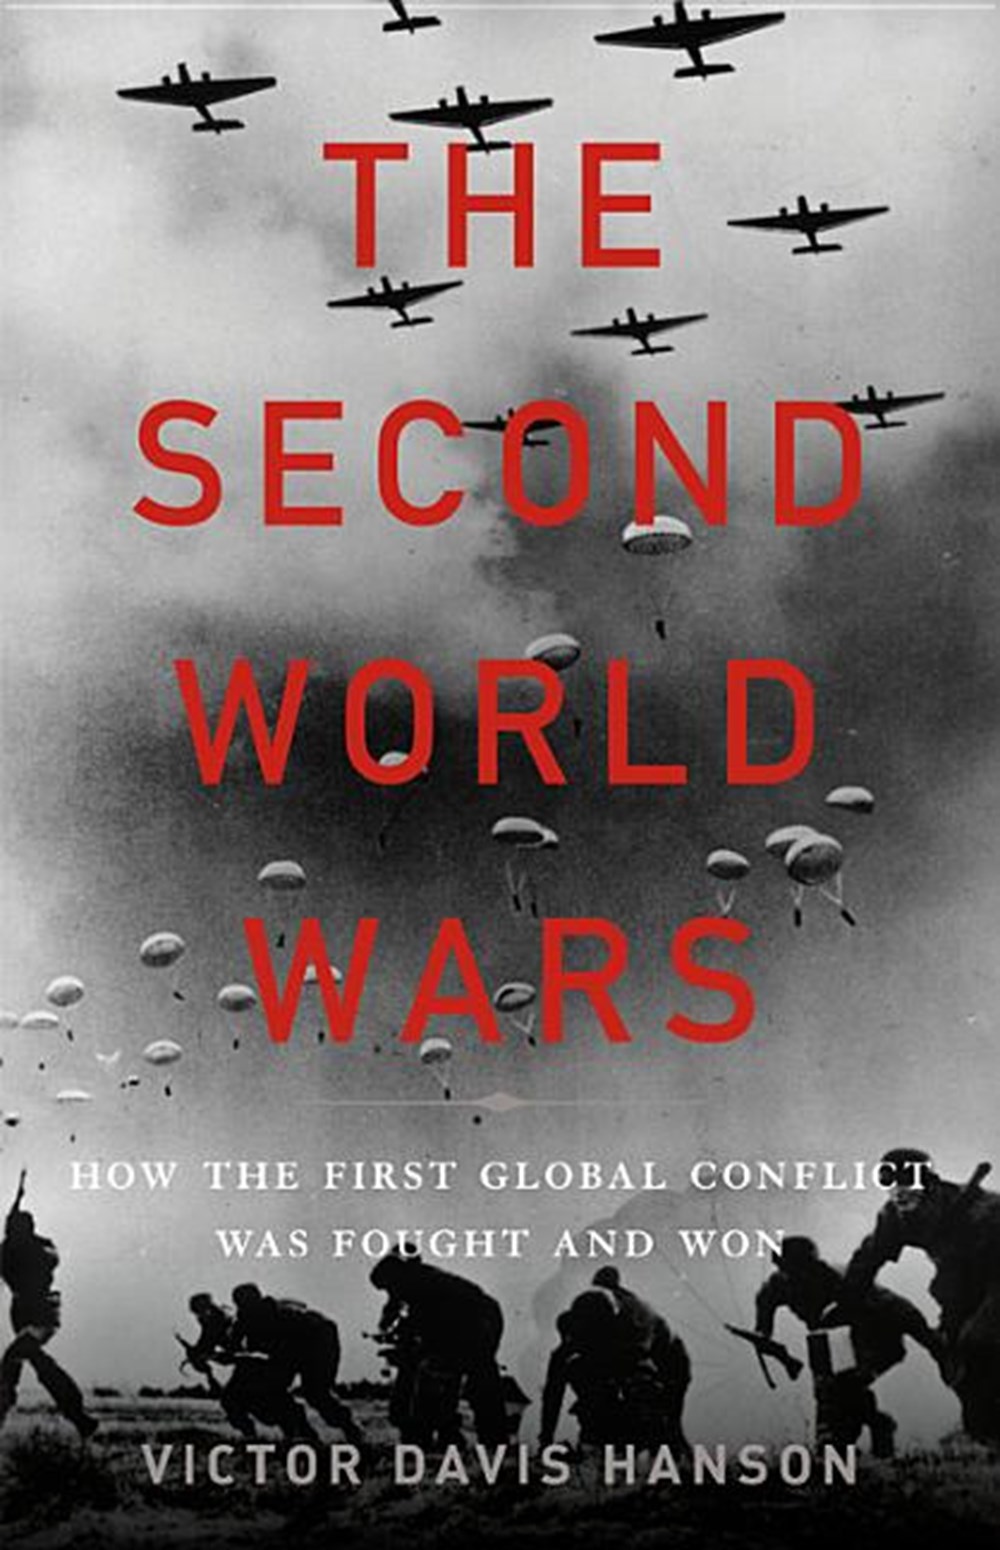 Second World Wars: How the First Global Conflict Was Fought and Won